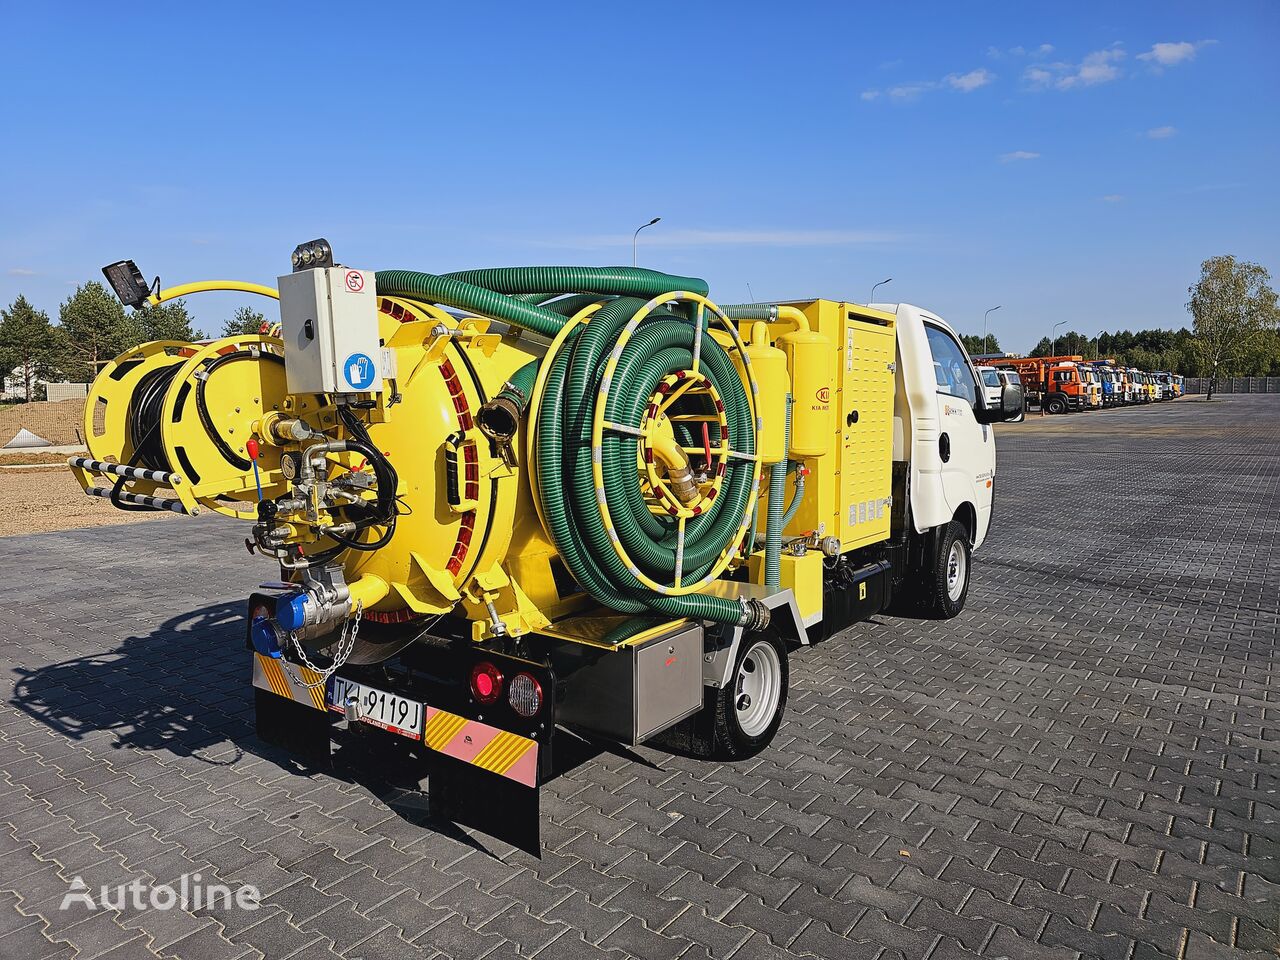 Isuzu Kia on categories B COMBI WUKO FOR DUCT CLEANING 2020 combination sewer cleaner